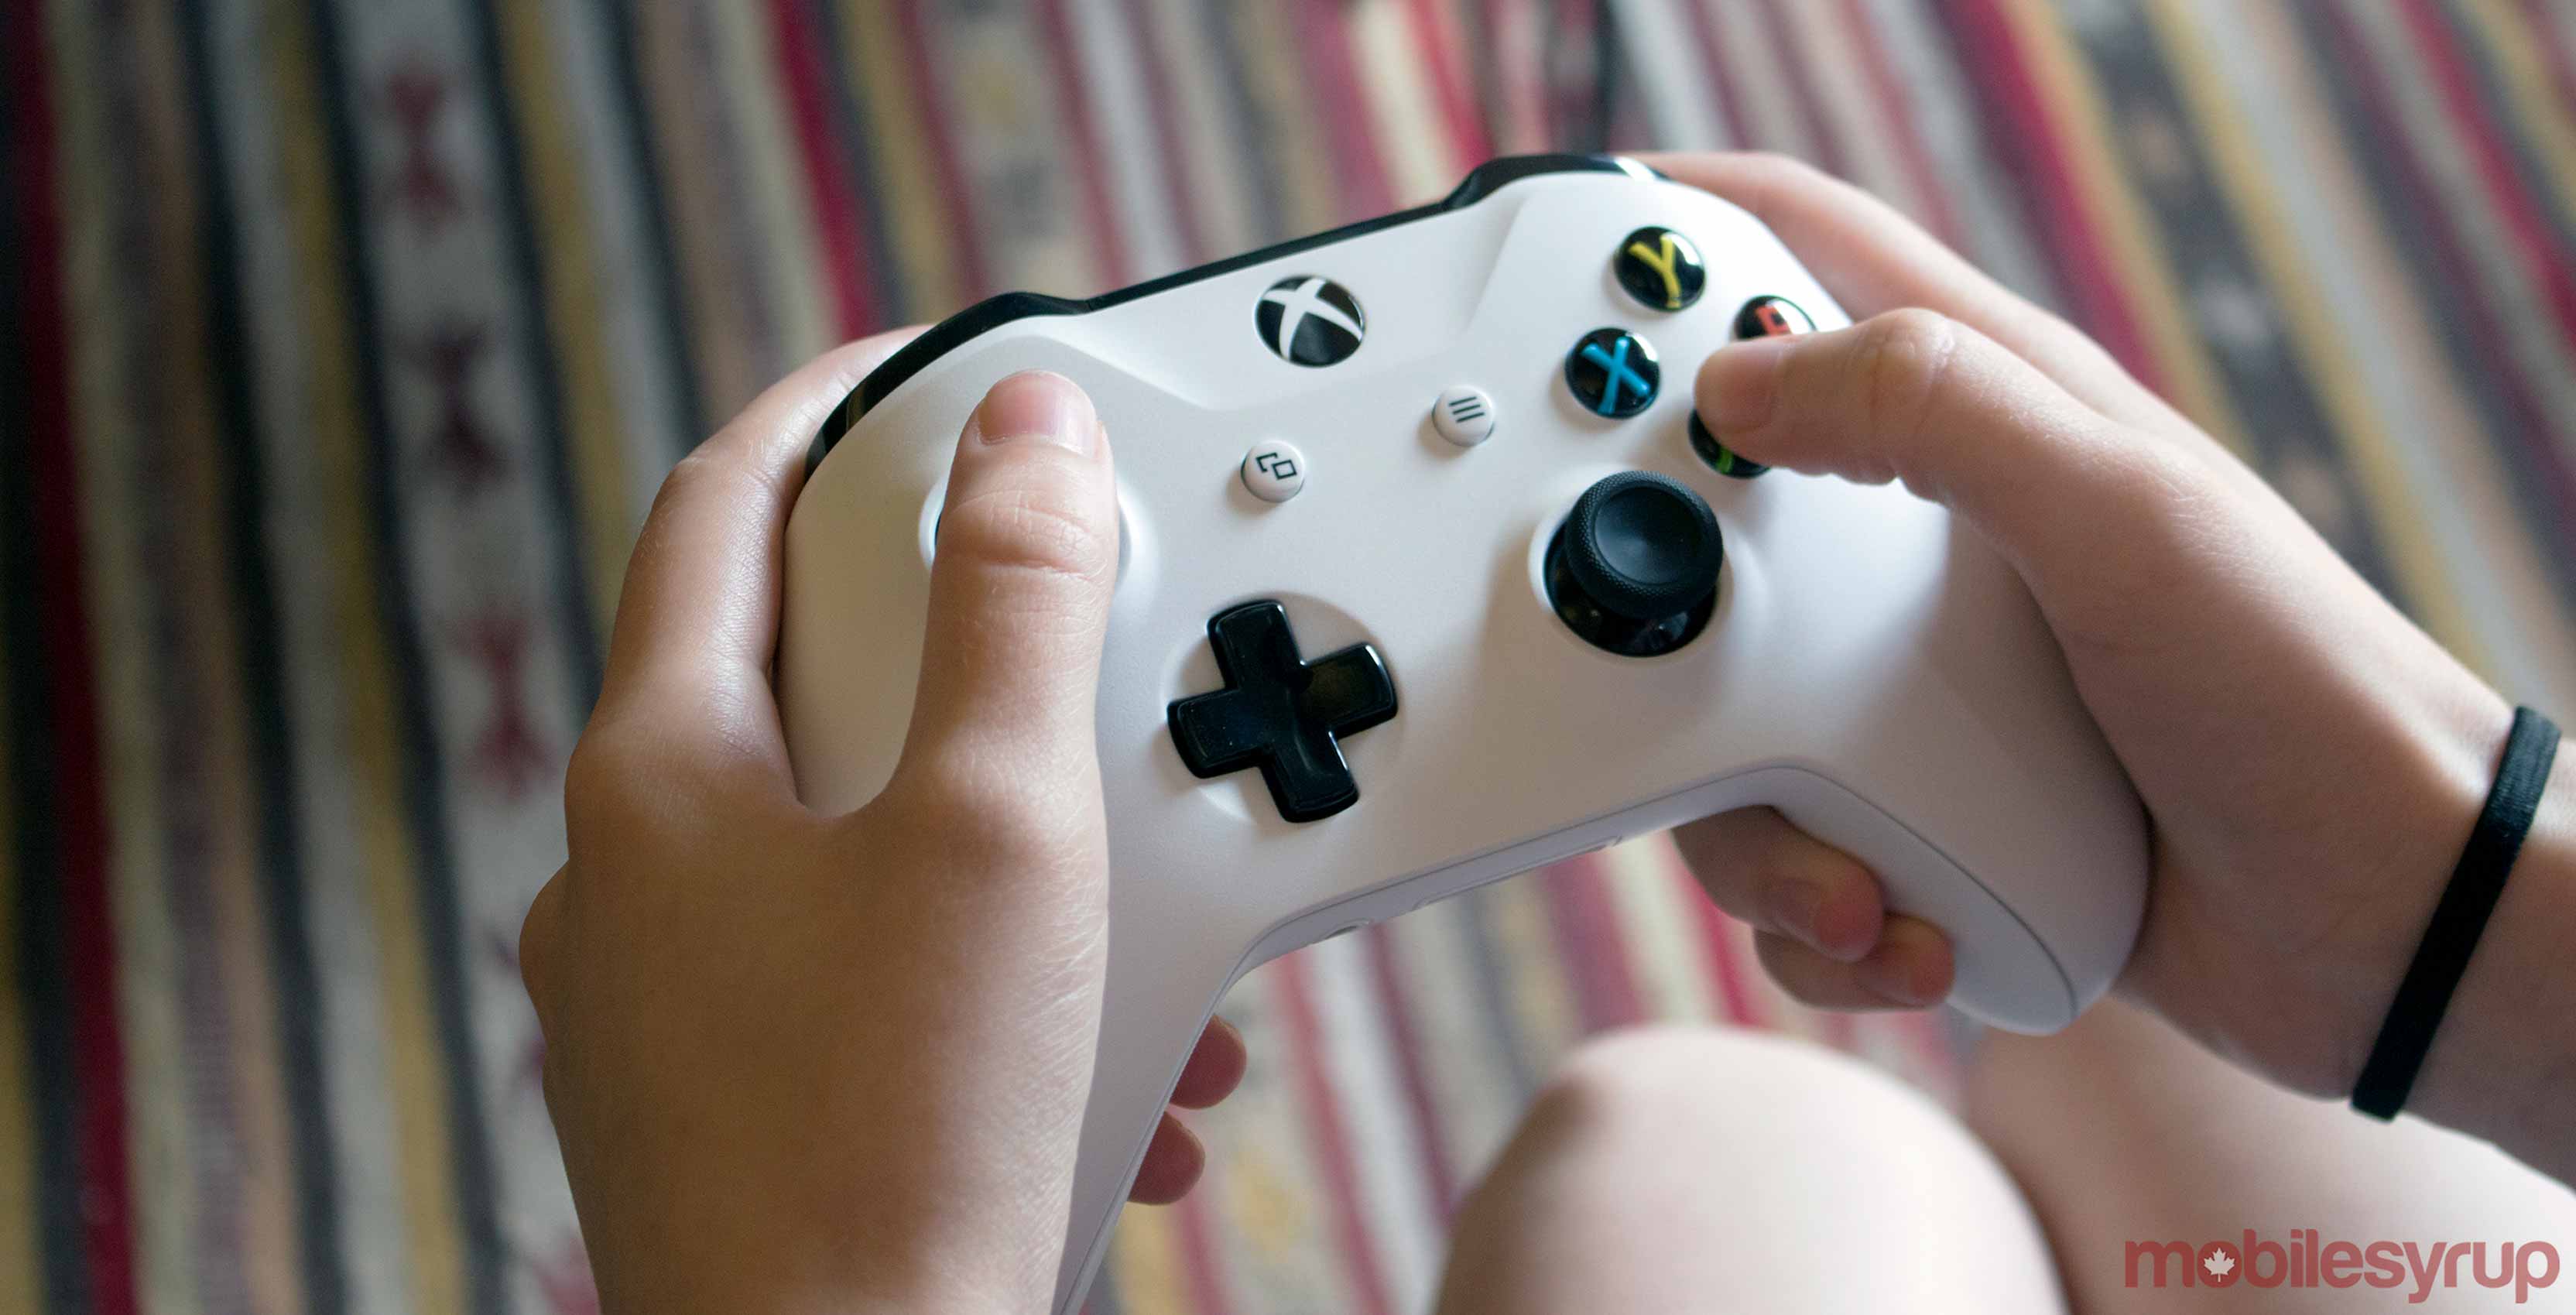 Xbox One white controller in hand